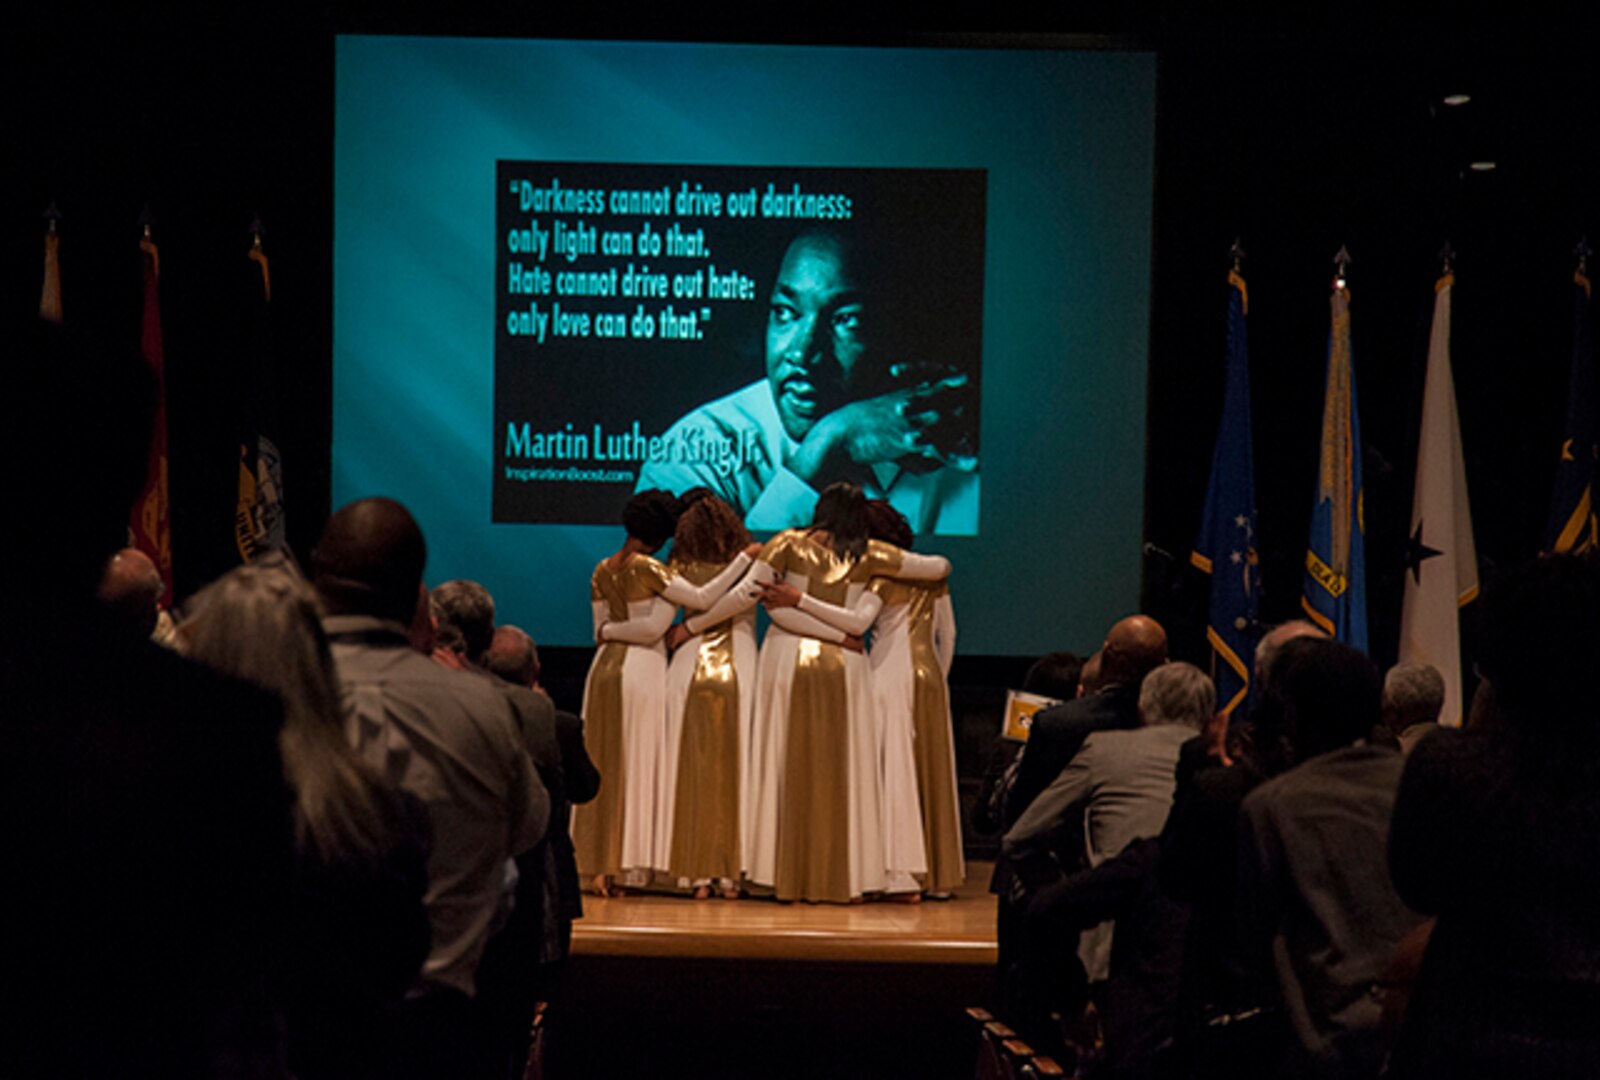 Defense Supply Center Columbus celebrated the life and legacy of Dr. Martin Luther King Jr. Jan. 20 inside the Building 20 Auditorium. Among the handful of performers and speakers was the Genesis Dance Troupe, who performed "The Heart That Forgives."